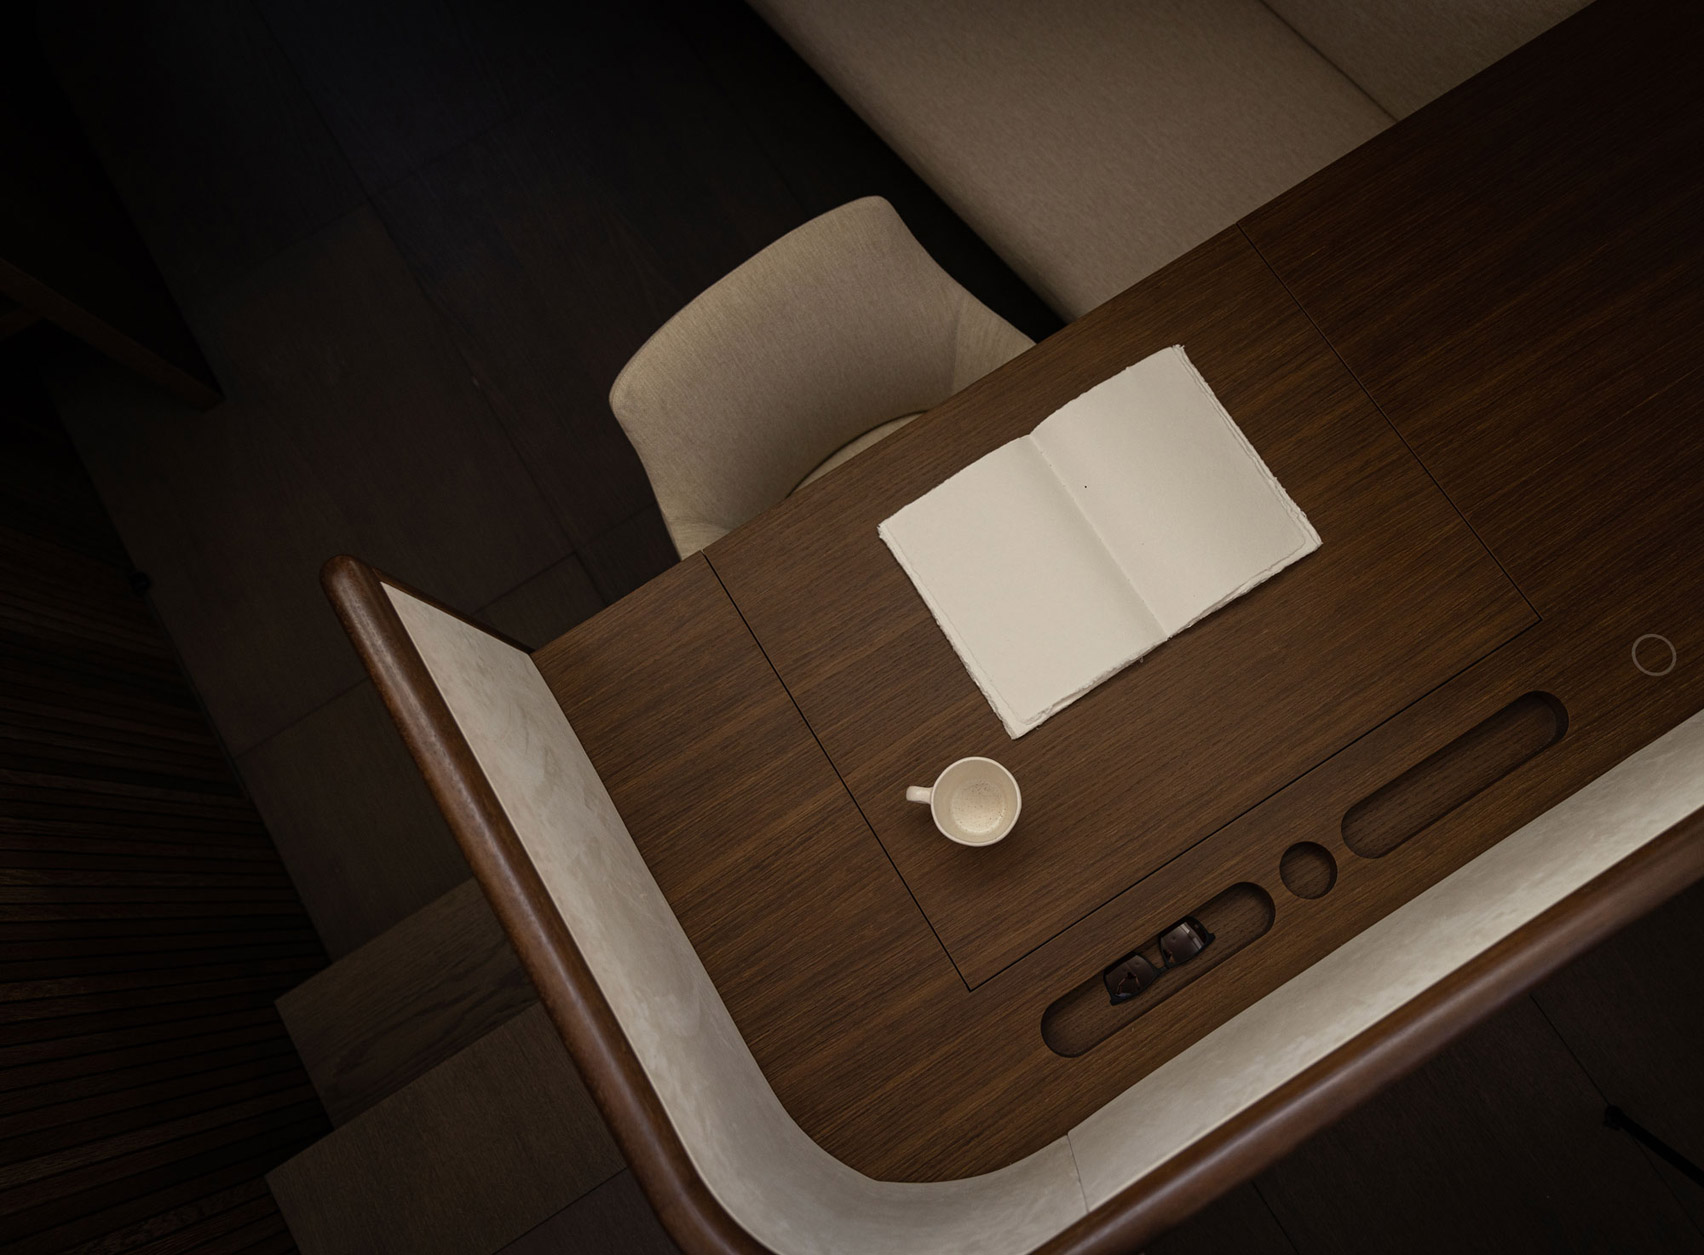 Study of yacht interior designed by Norm Architects